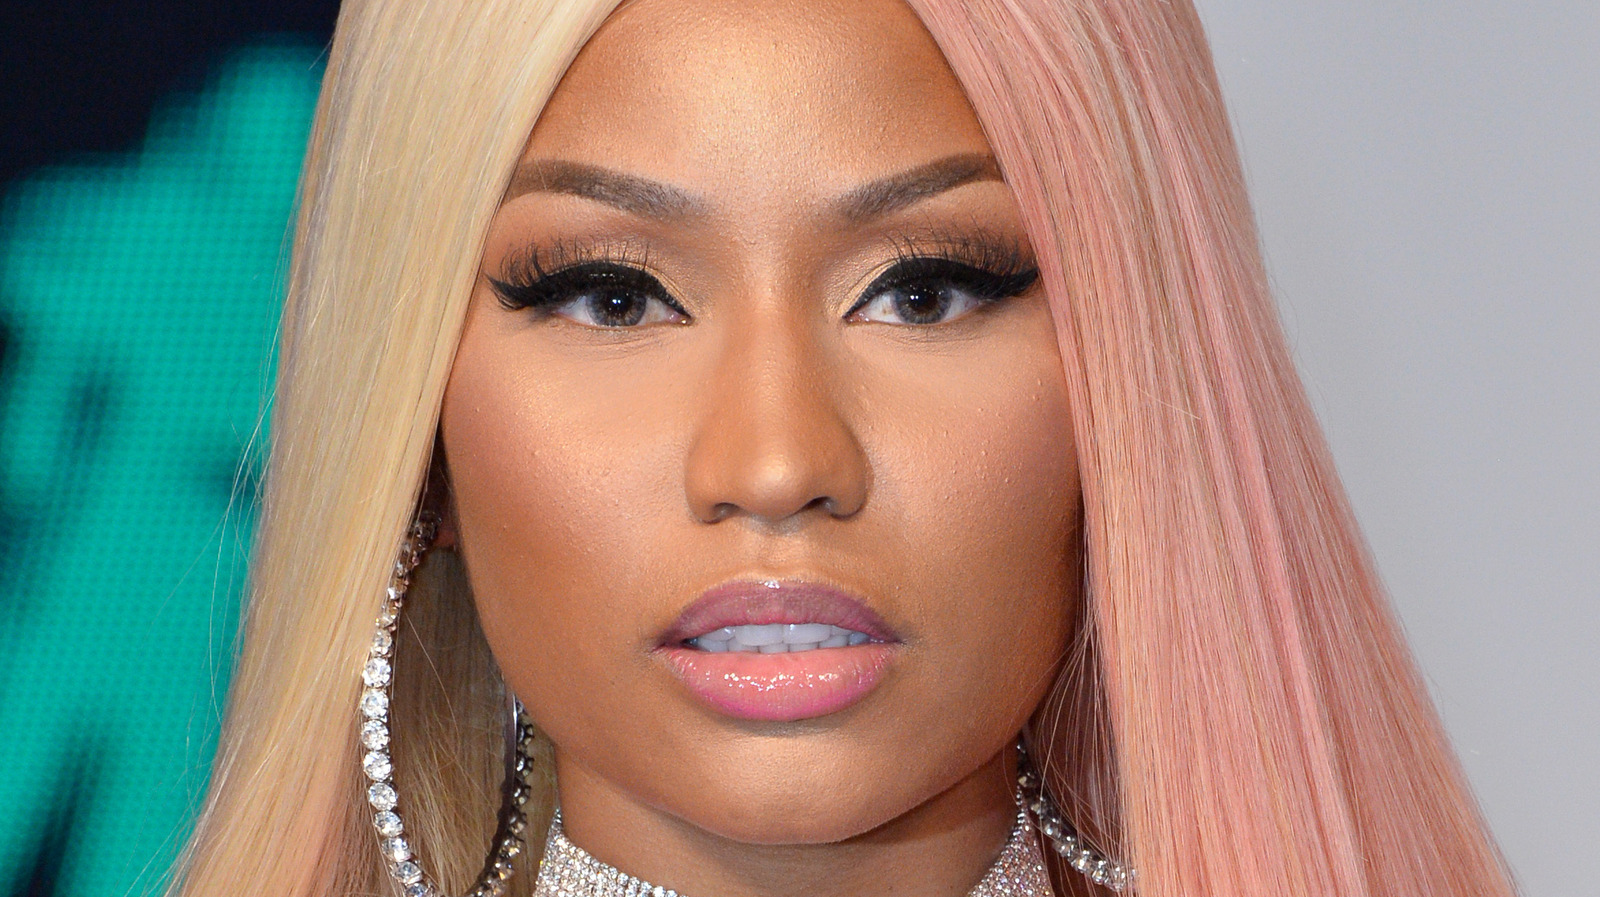 A legal expert reveals why Nicki Minaj's threatened lawsuit may be a losing battle